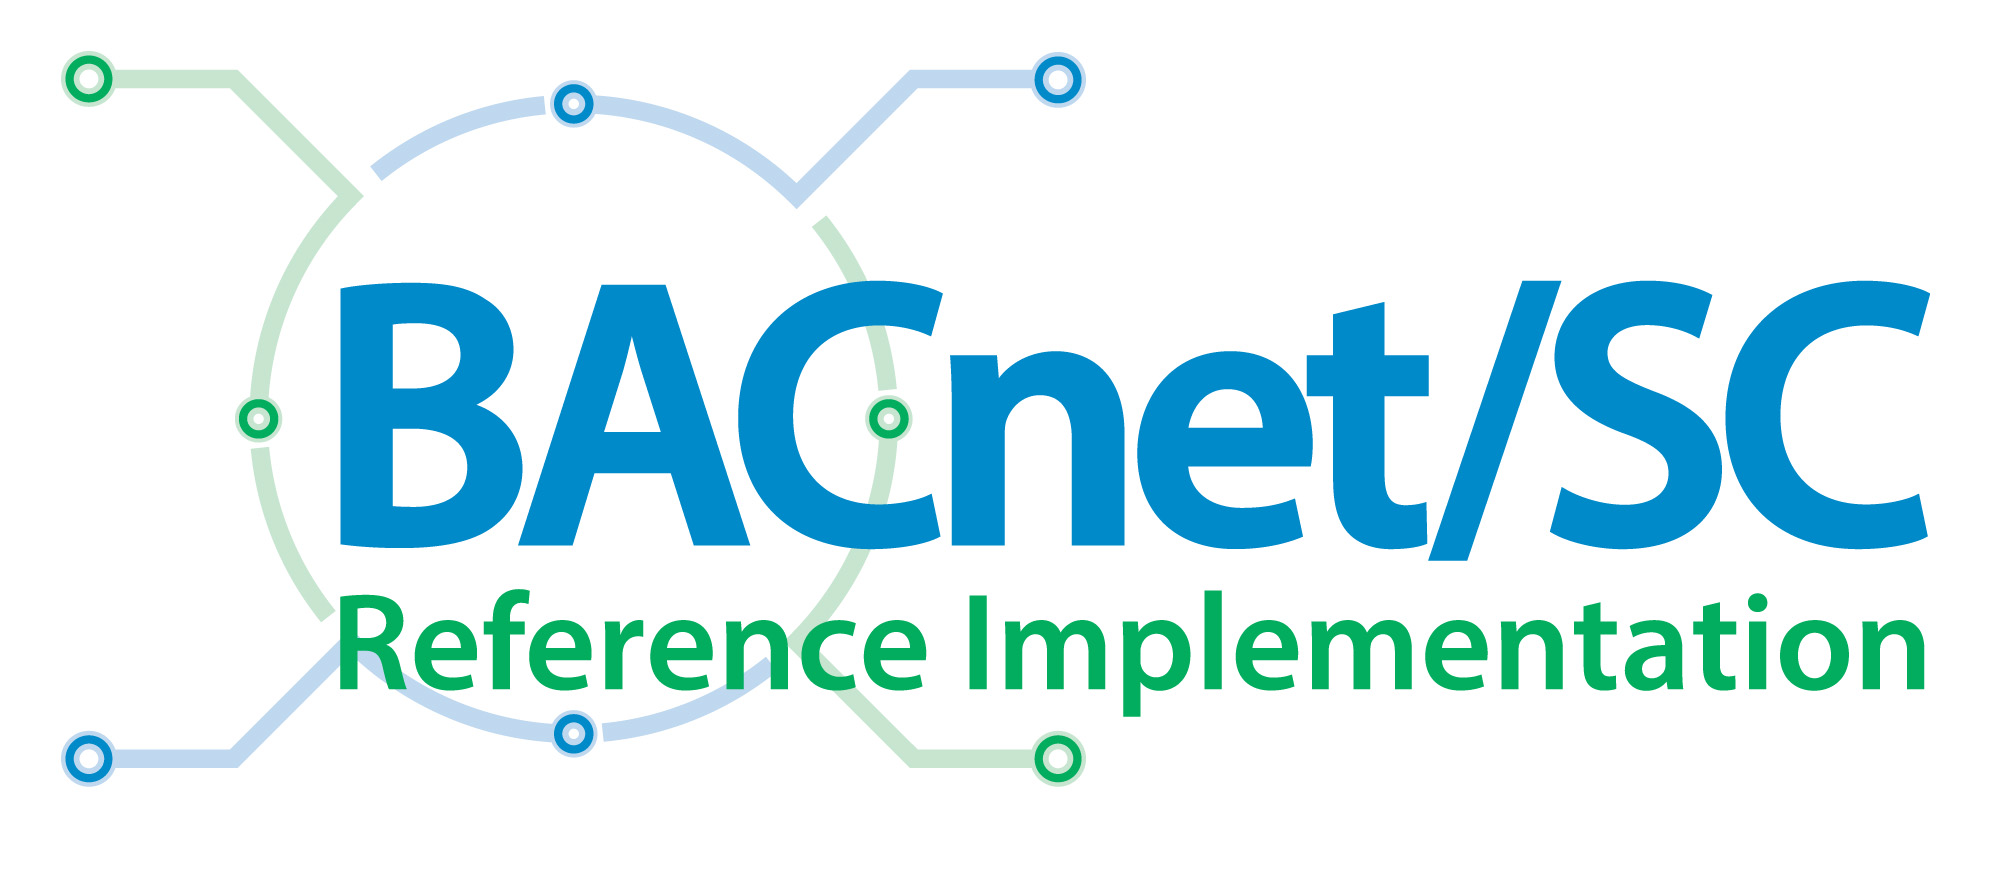 BACnet International's BACnet/SC Reference Implementation is available to download for free on SourceForge.